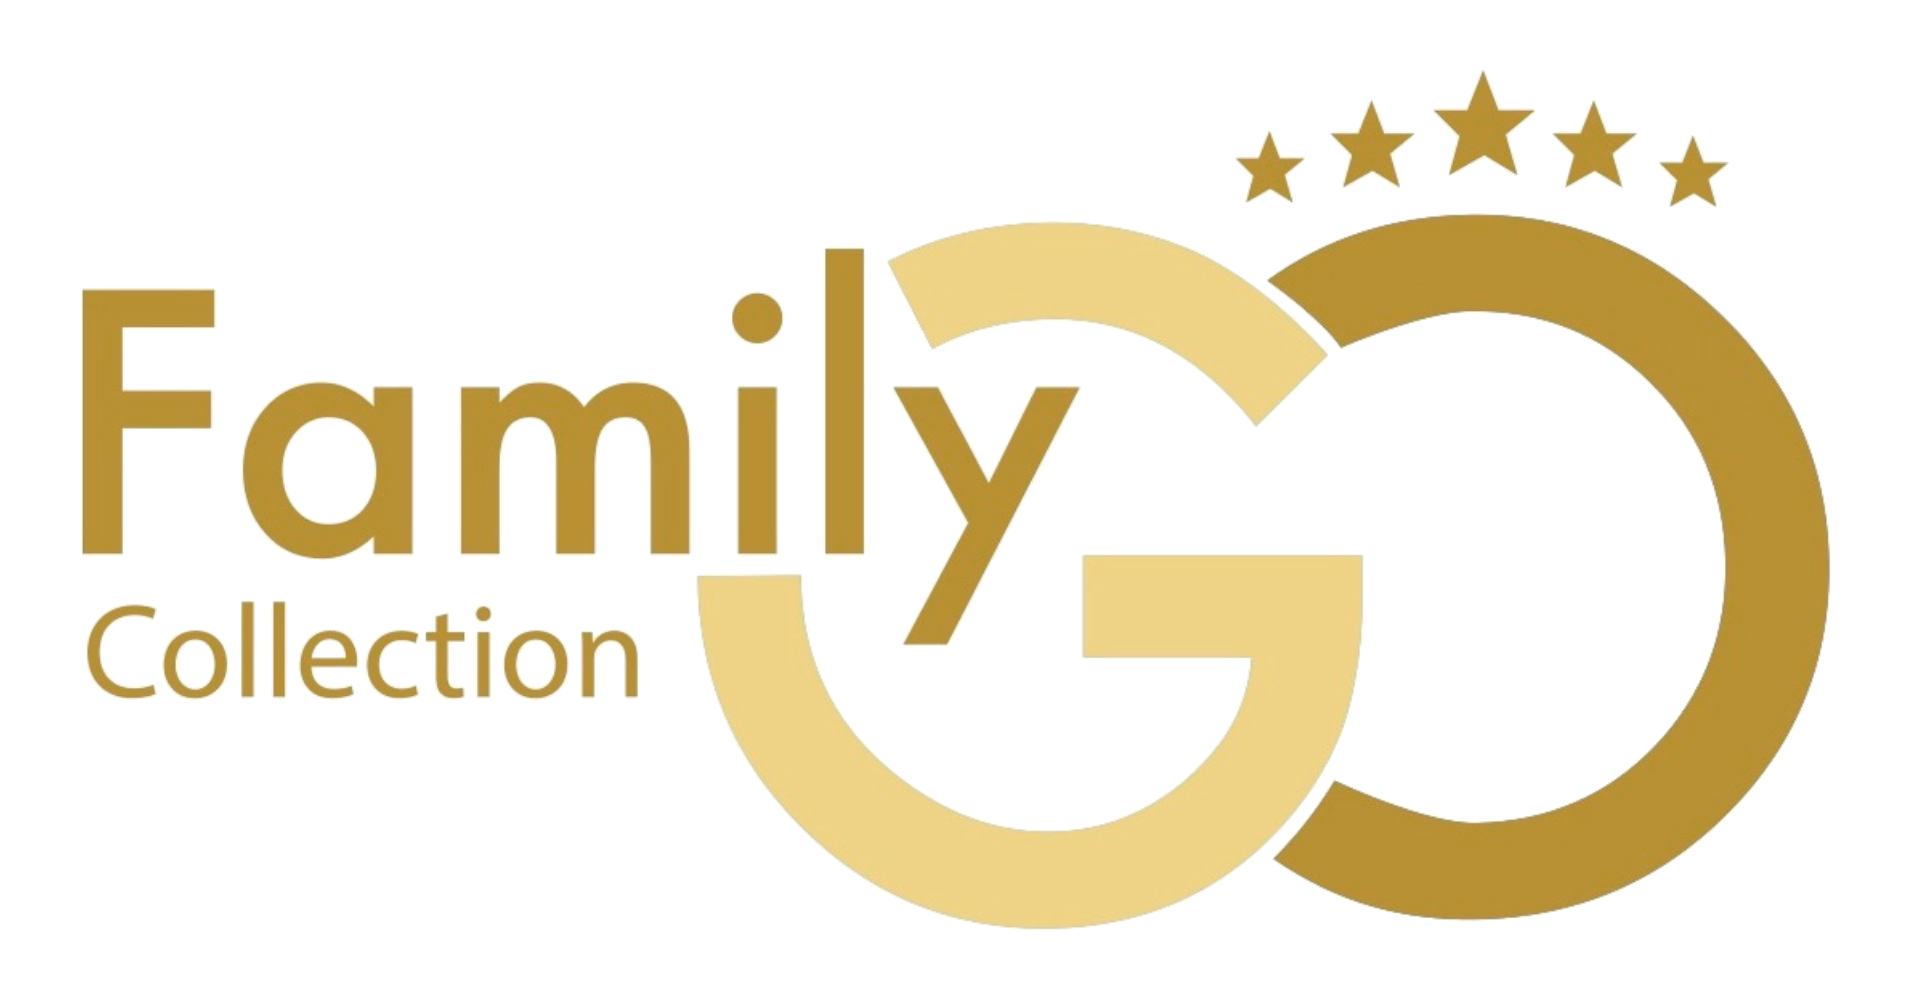 Family Go Collection